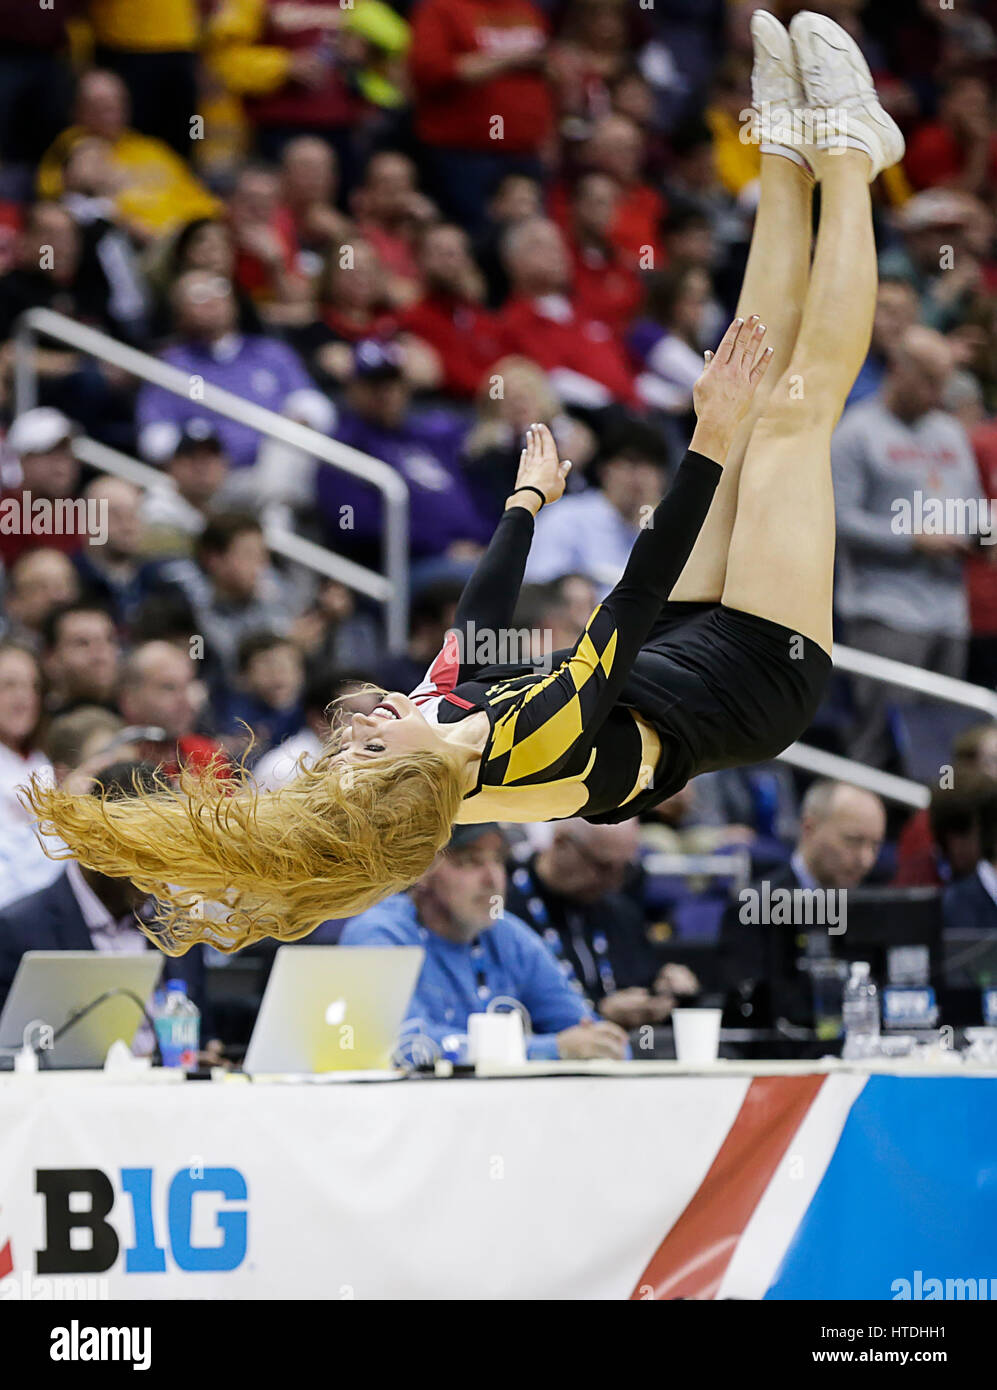 Washington, DC, USA. 10th Mar, 2017. Maryland Terrapin's Cheerleader performs during a Big 10 Men's Basketball Tournament game between the Northwestern Wildcats and the Maryland Terrapins at the Verizon Center in Washington, DC. Justin Cooper/CSM/Alamy Live News Stock Photo